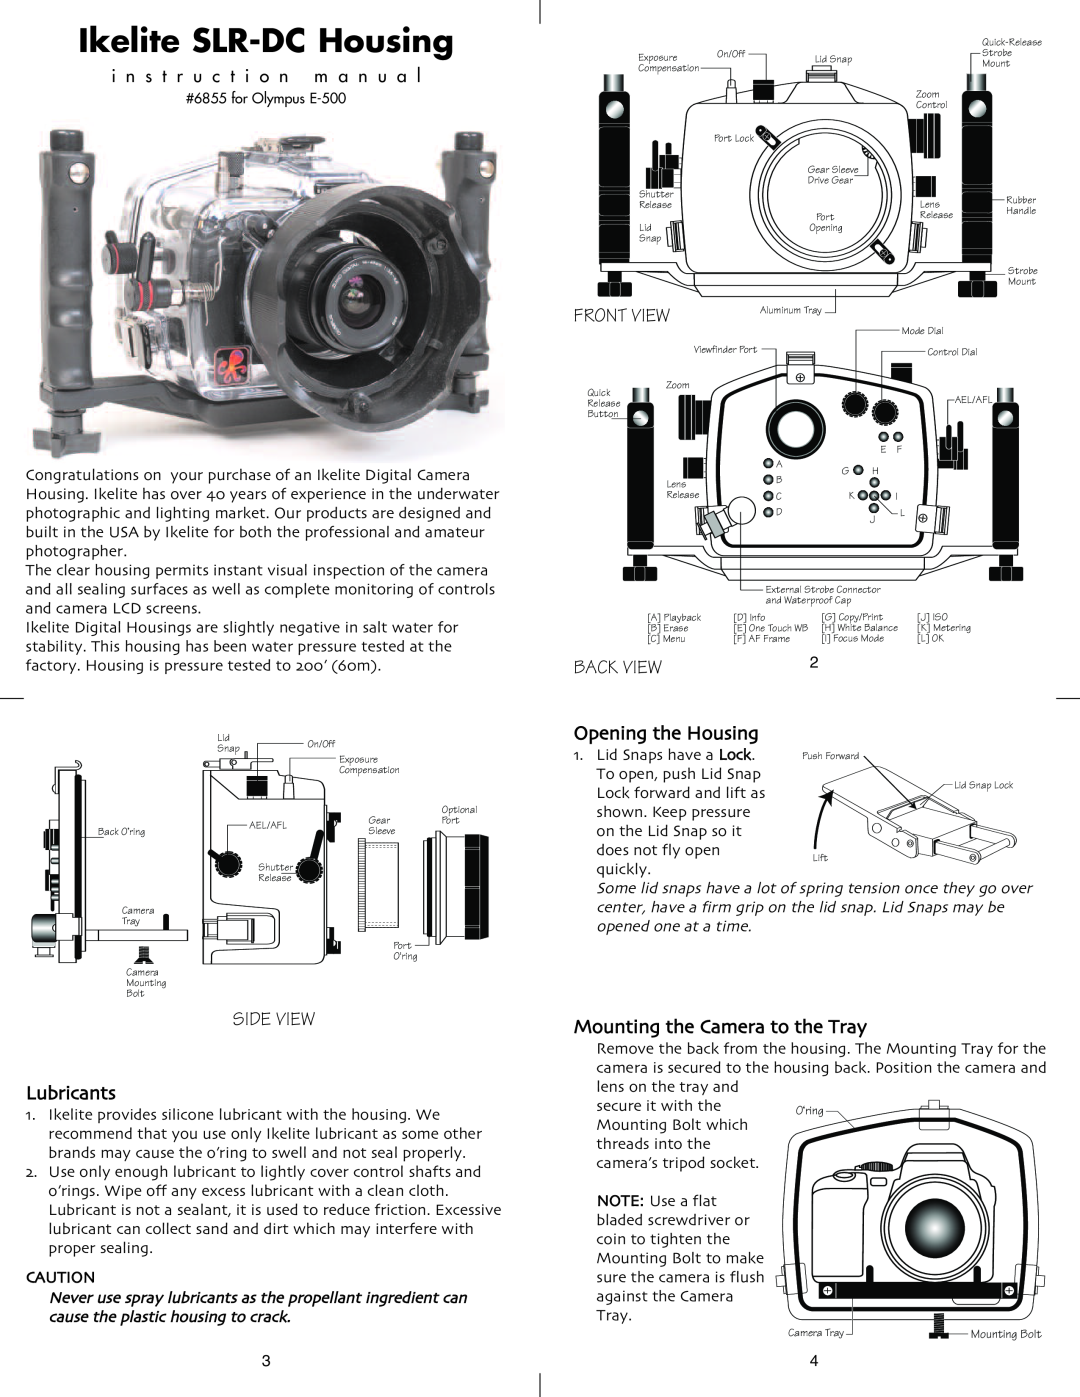 Ikelite E-500 instruction manual Lubricants, Opening the Housing, Mounting the Camera to the Tray, Ikelite SLR-DC Housing 